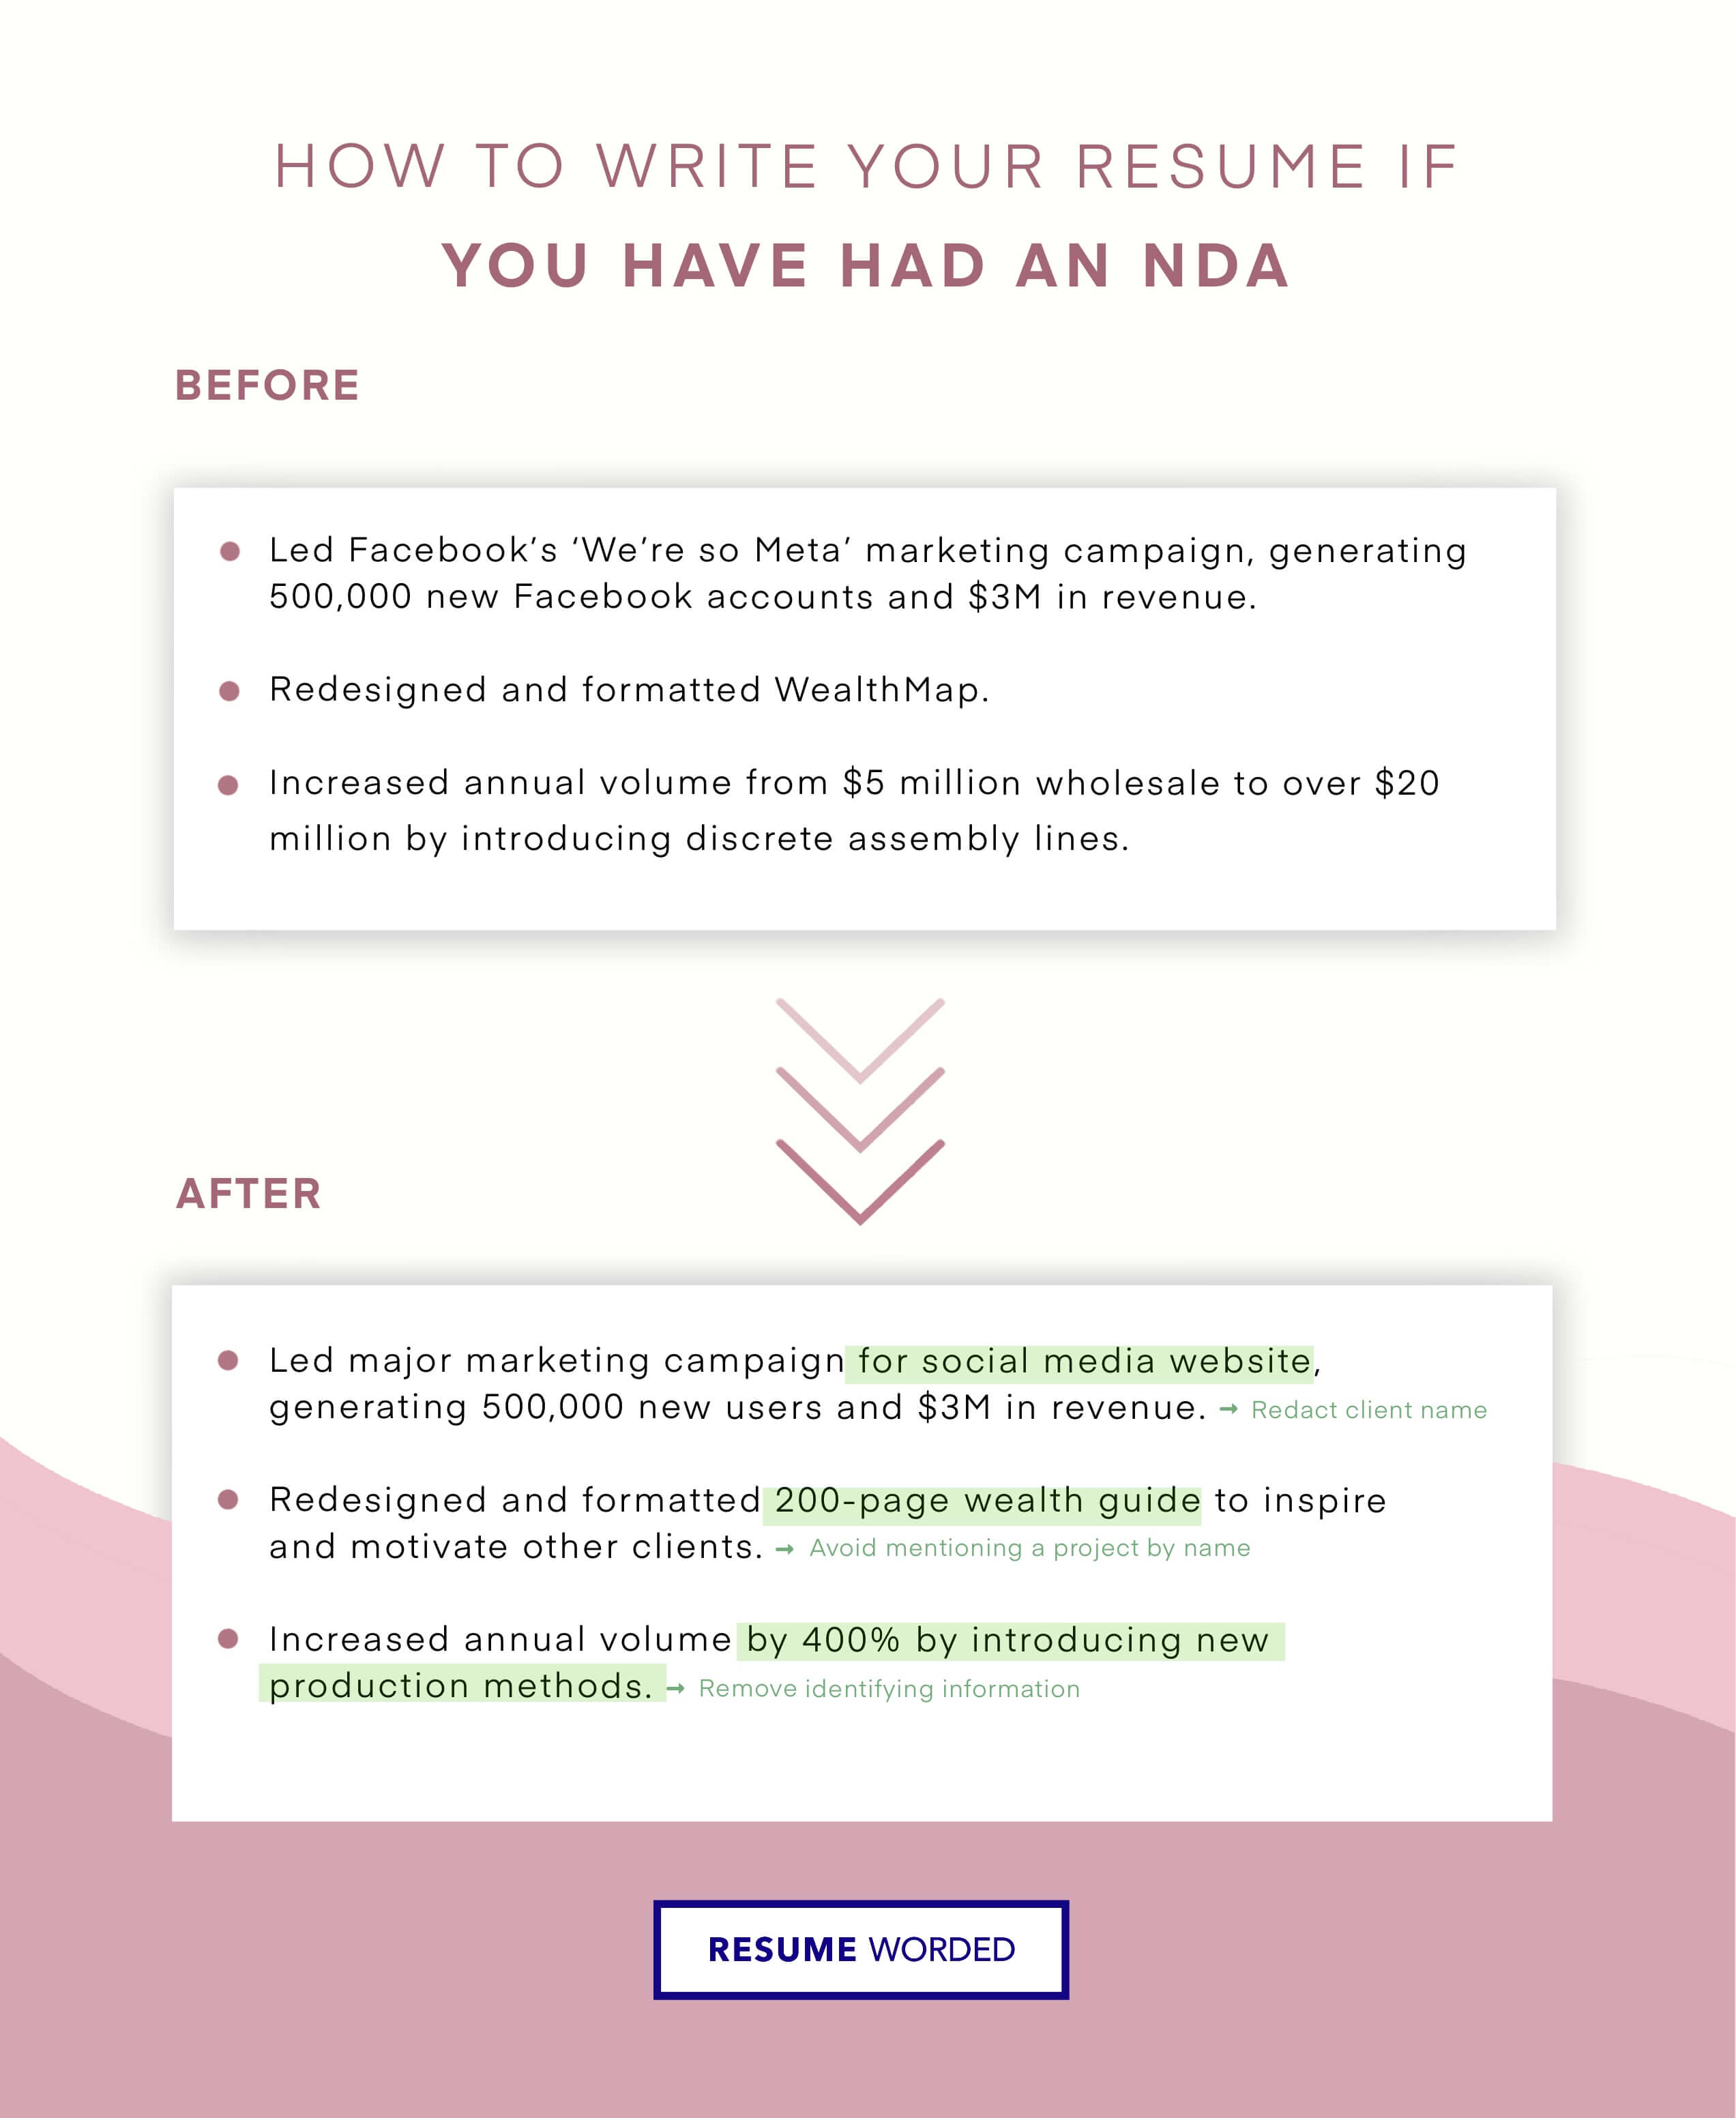 How To Write a Resume If You Have Had an NDA